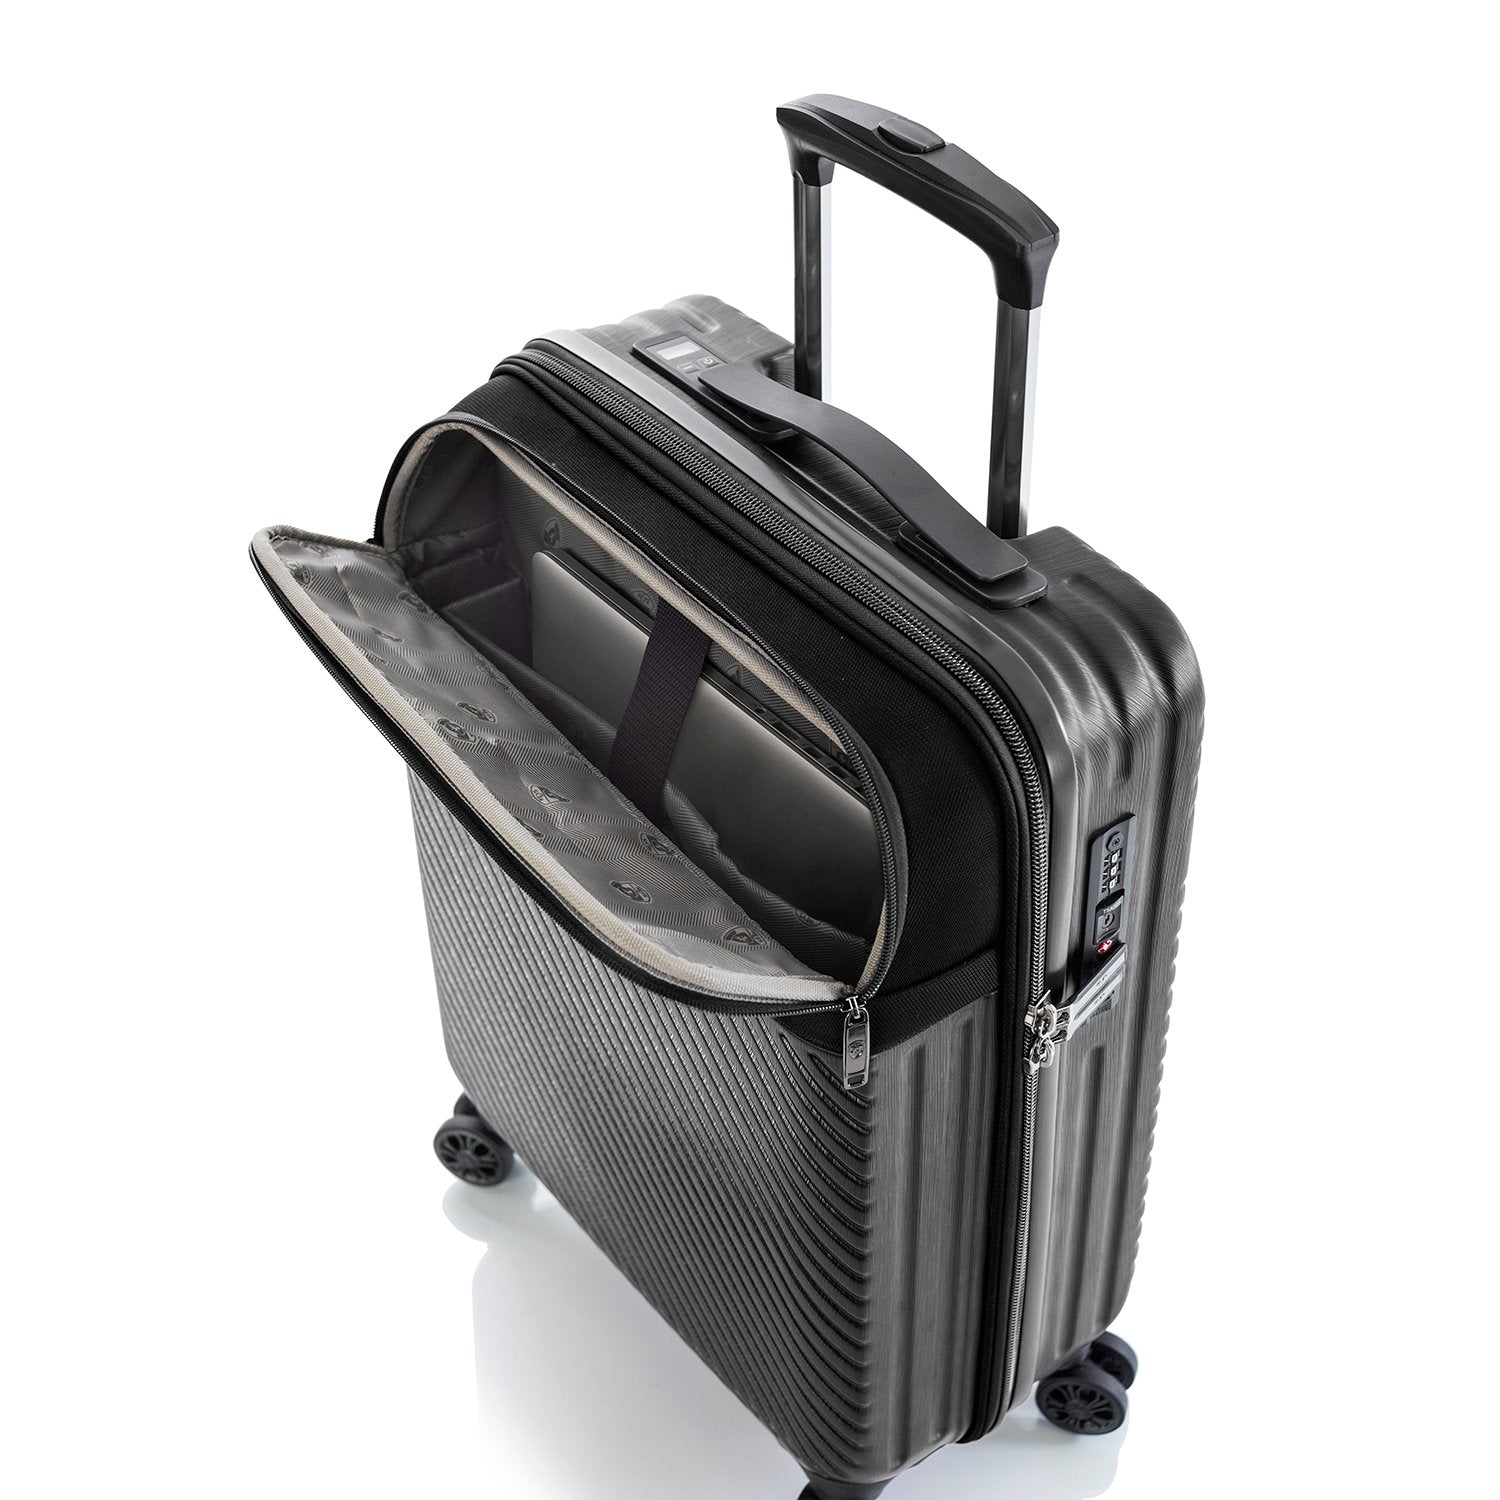 Charge-A-Weigh 2.0 - 3pc Luggage Set